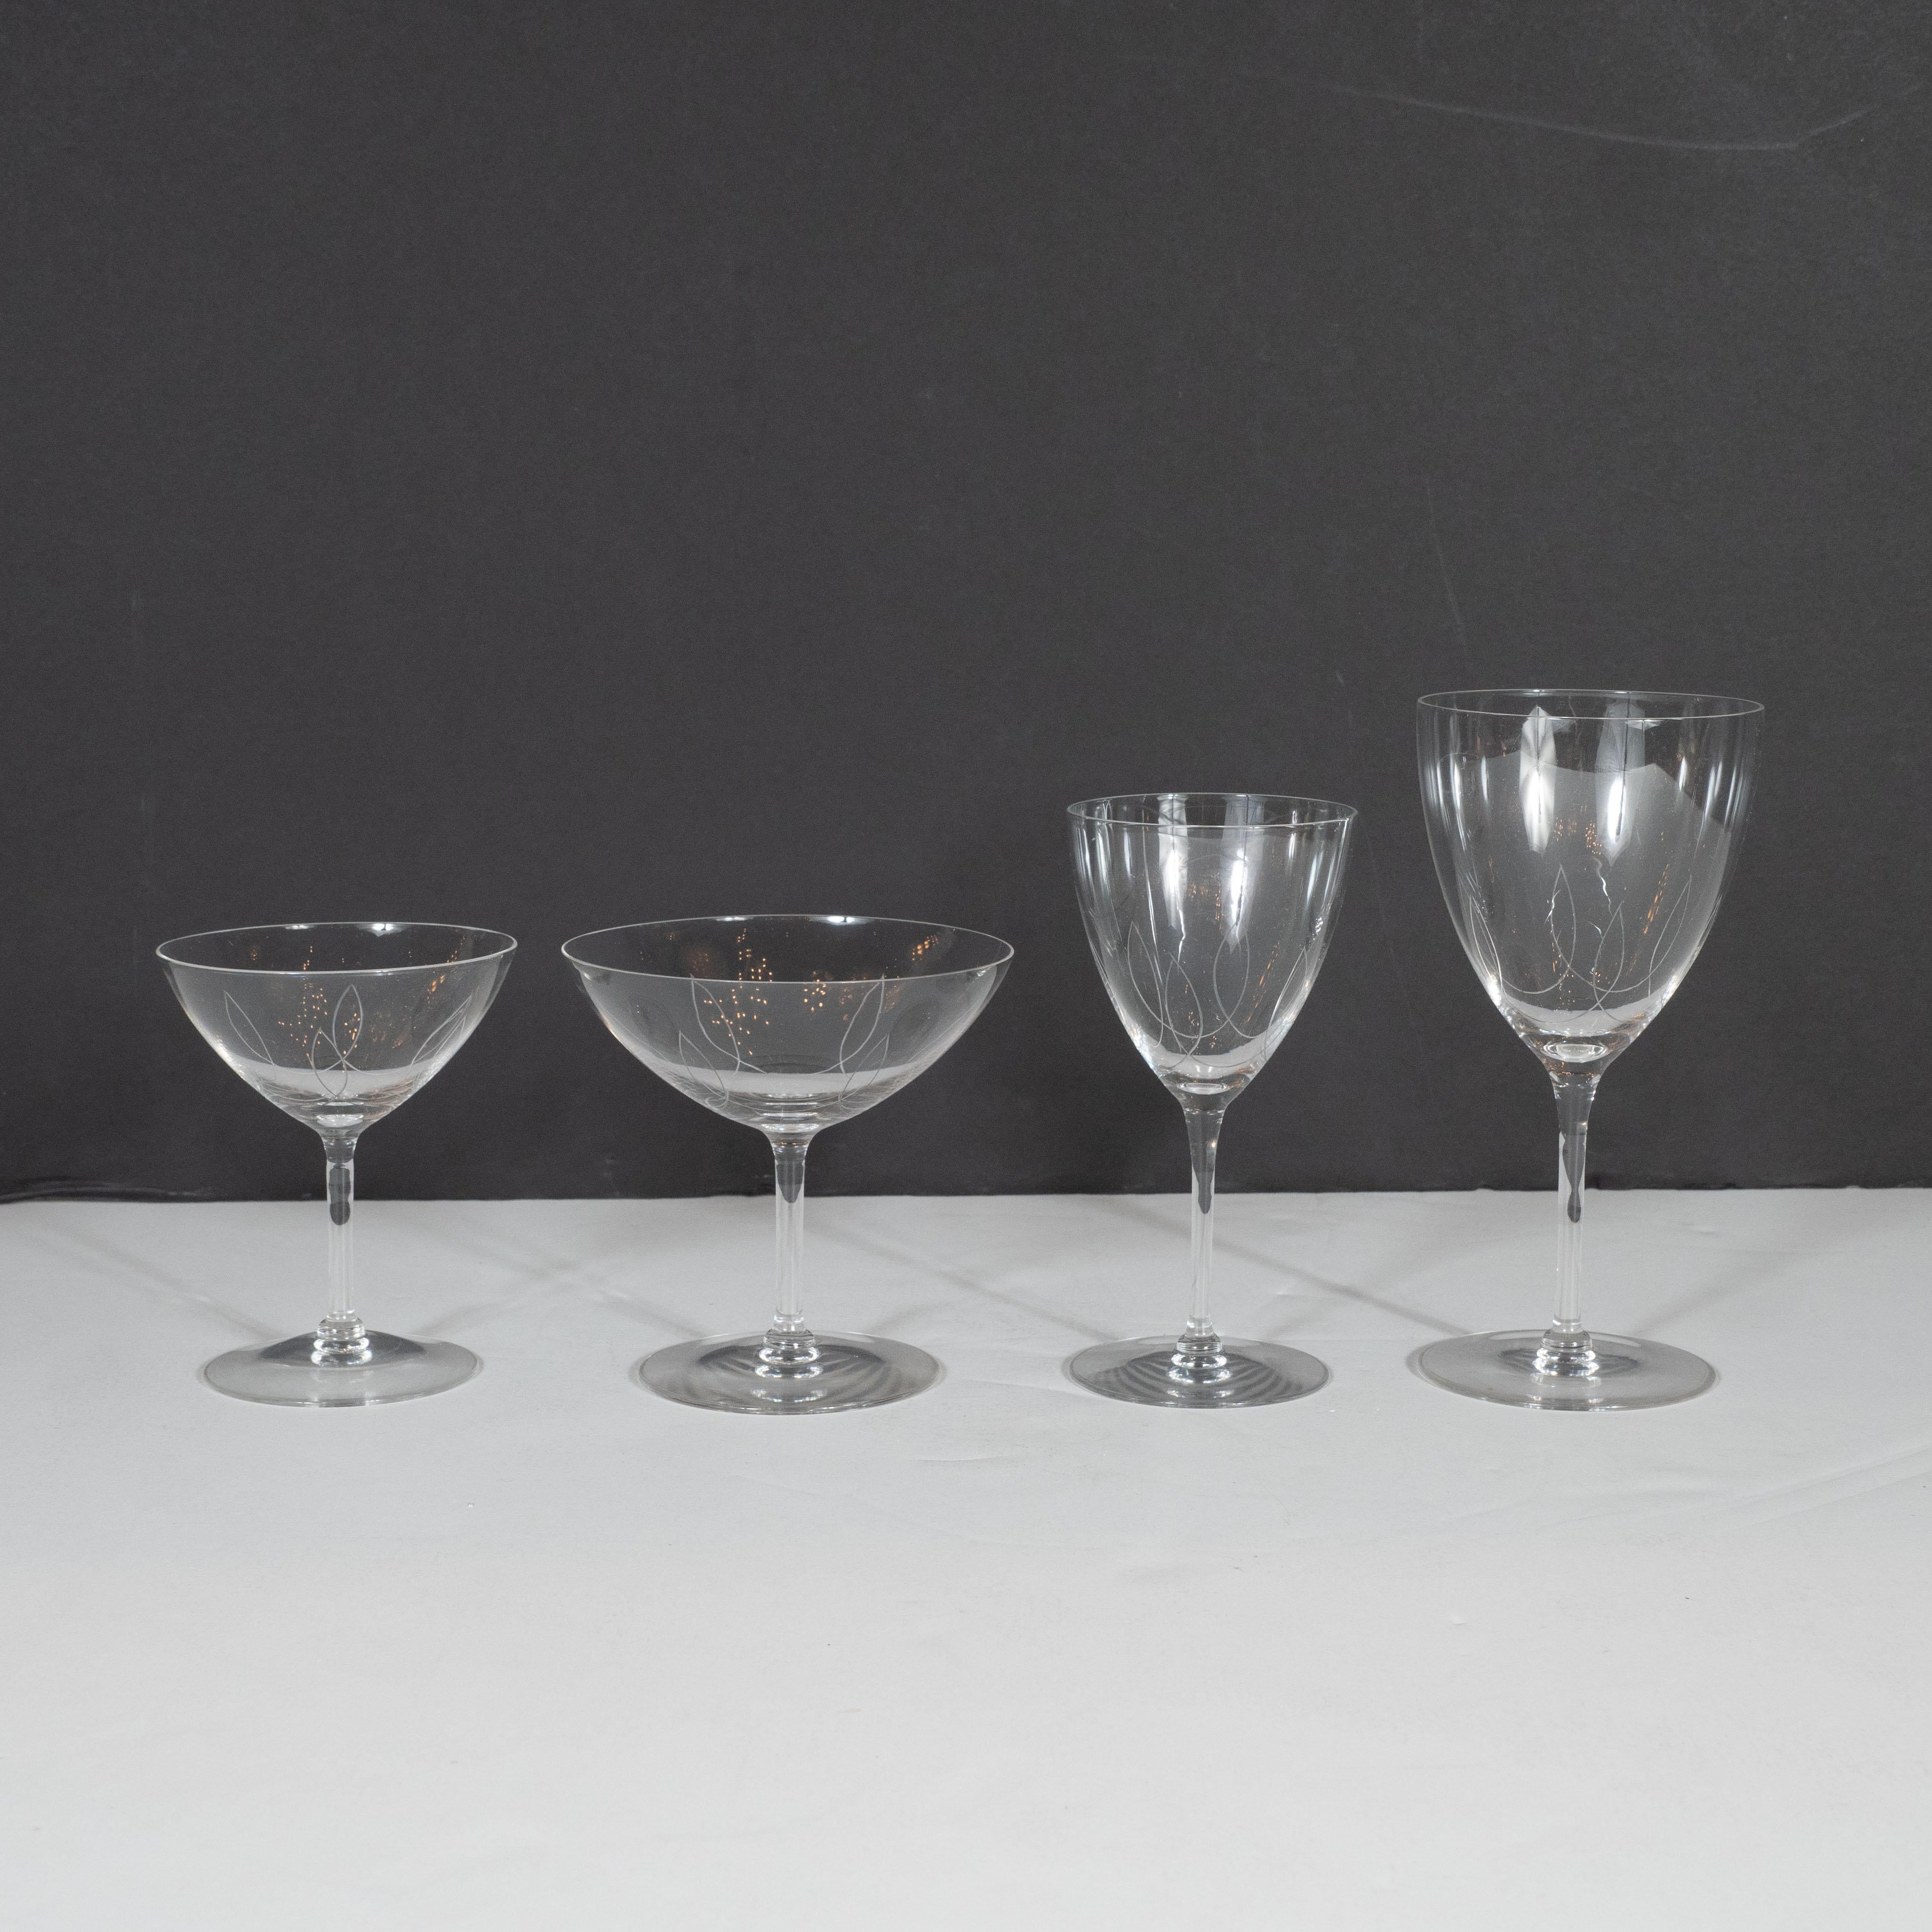 This elegant Art Deco complete set of eight glasses was realized in the United States, circa 1940. It features eight cocktail glasses, champagne coupes, wine glasses and water glasses, each etched with a curvilinear pattern running across the body